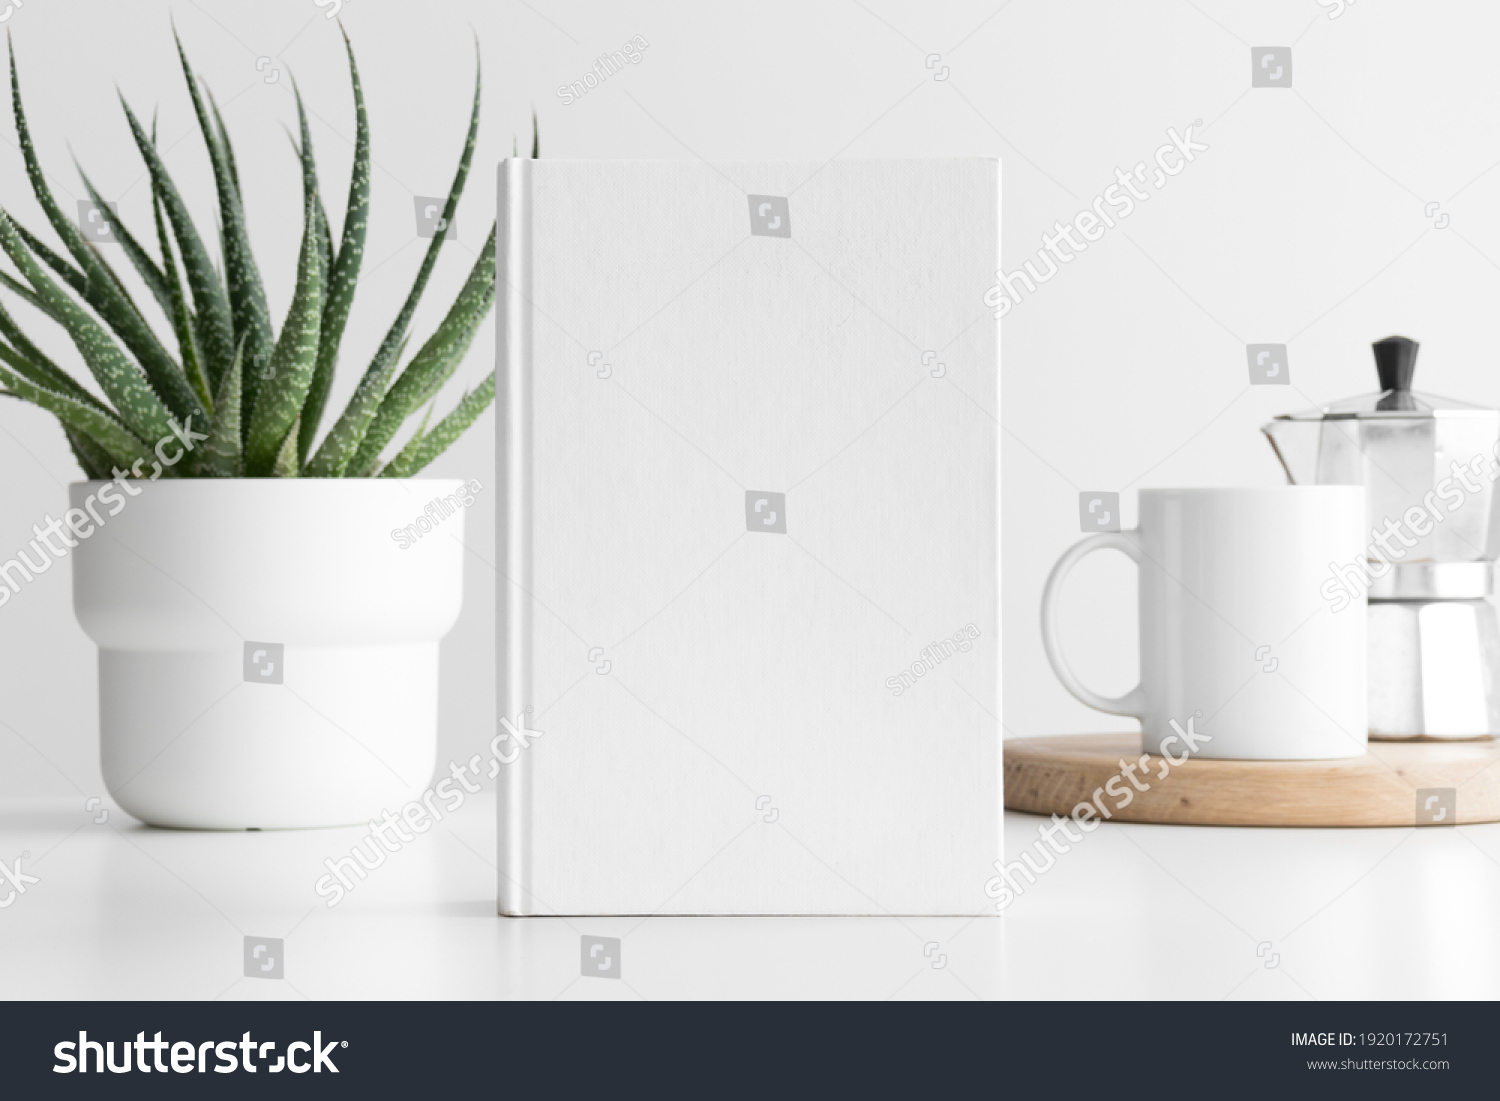 White book mockup with a succulent plant and a mug on a white table. #1920172751